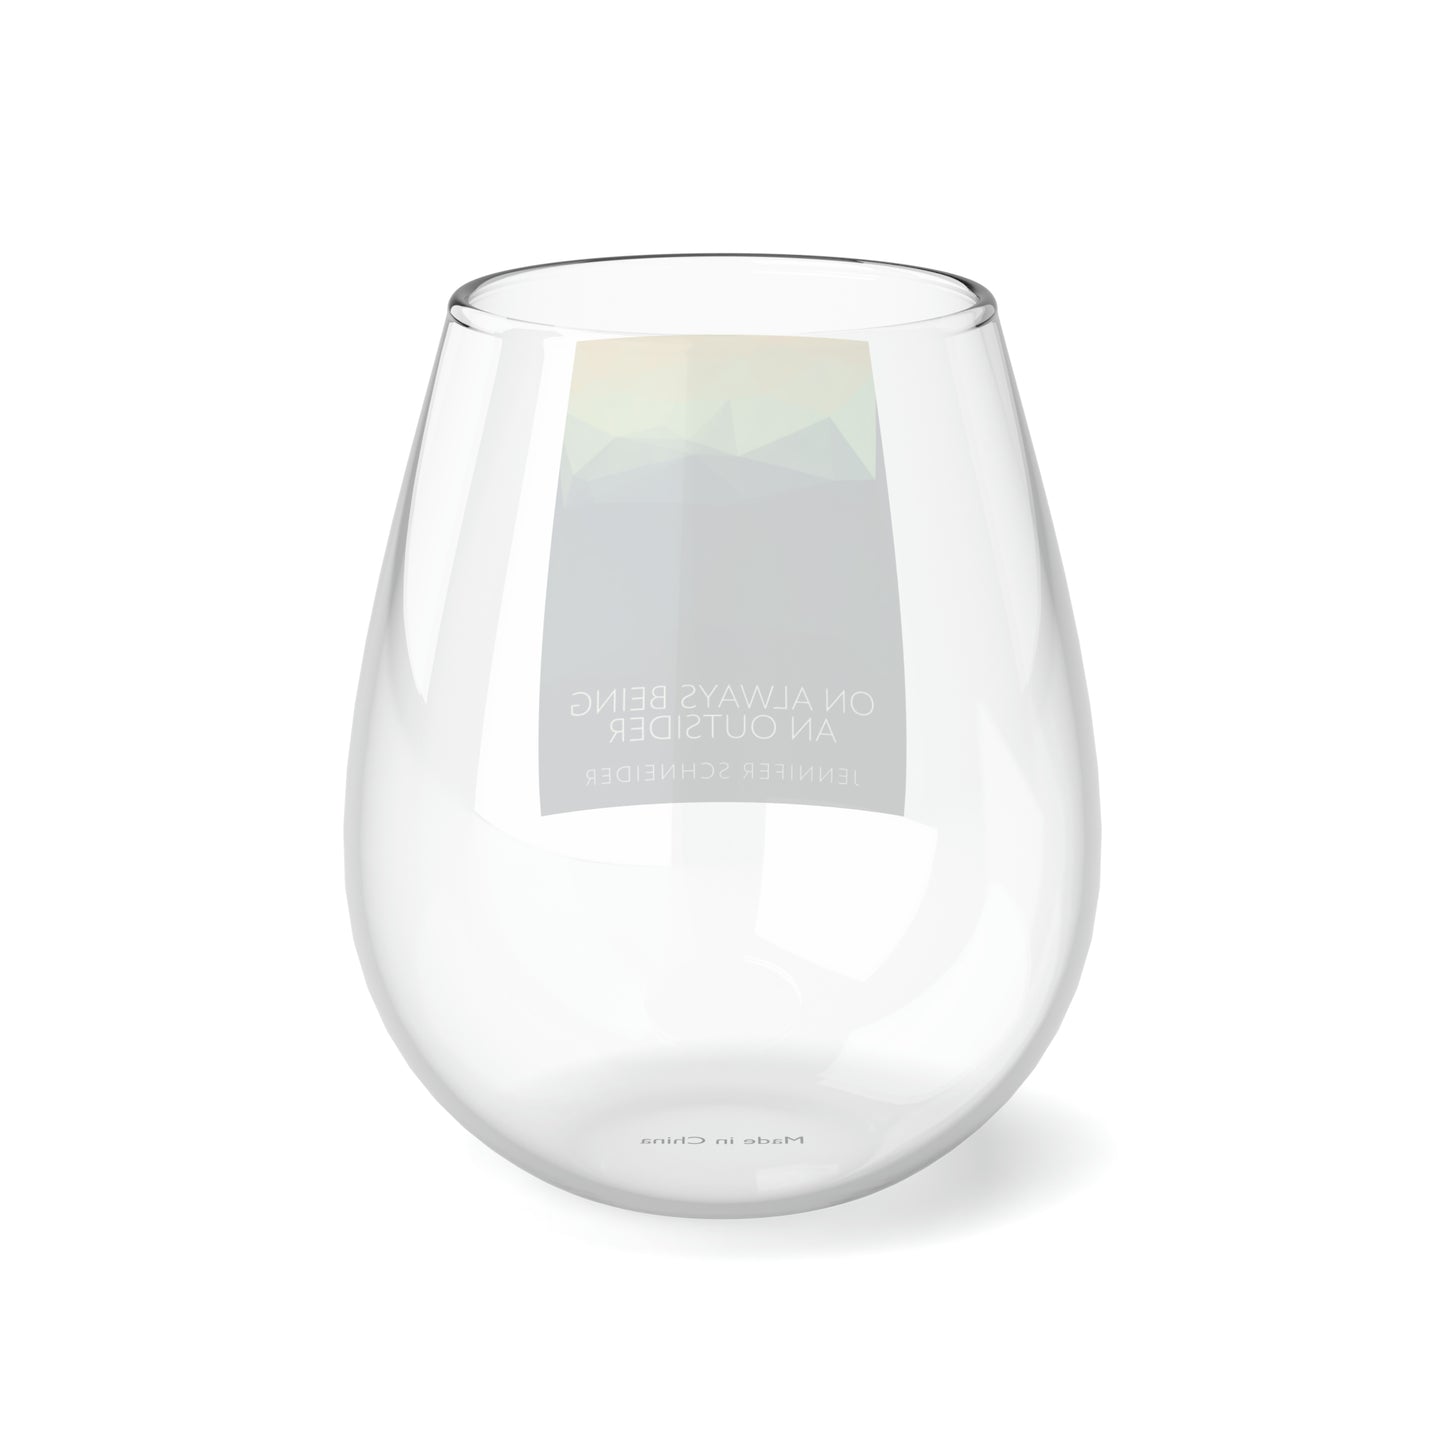 On Always Being An Outsider - Stemless Wine Glass, 11.75oz